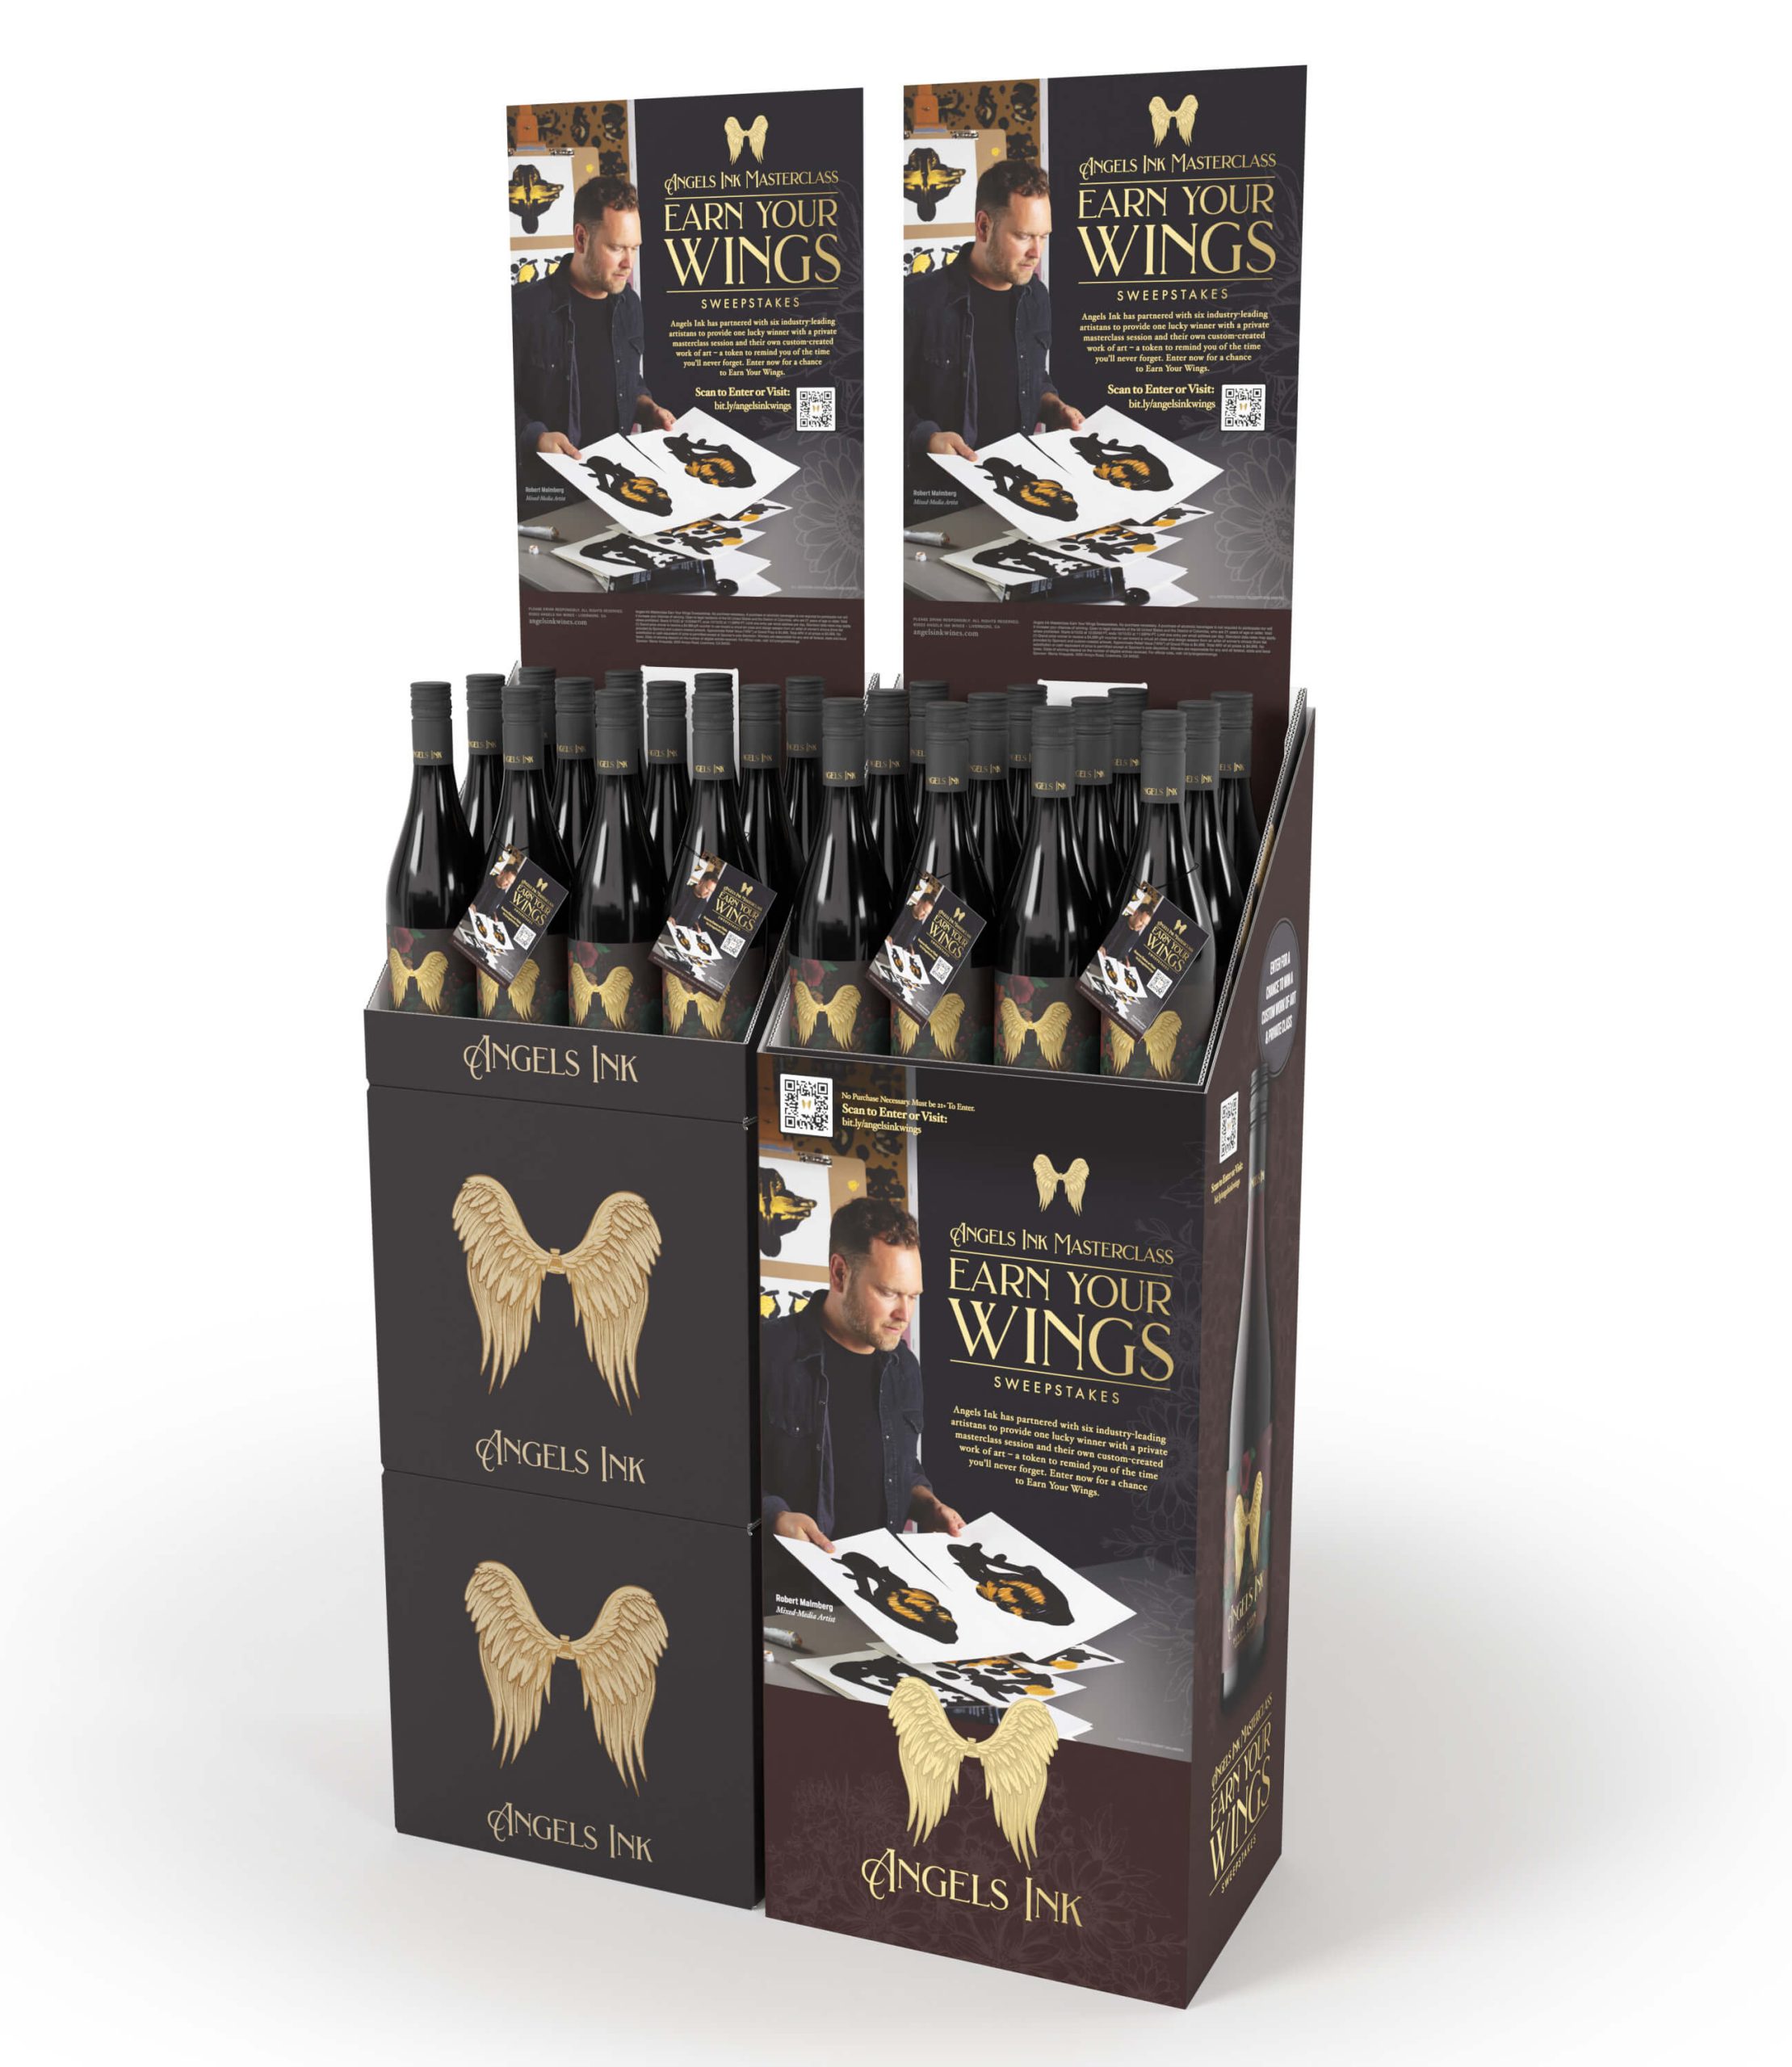 A display of bottles with gold wings on them.